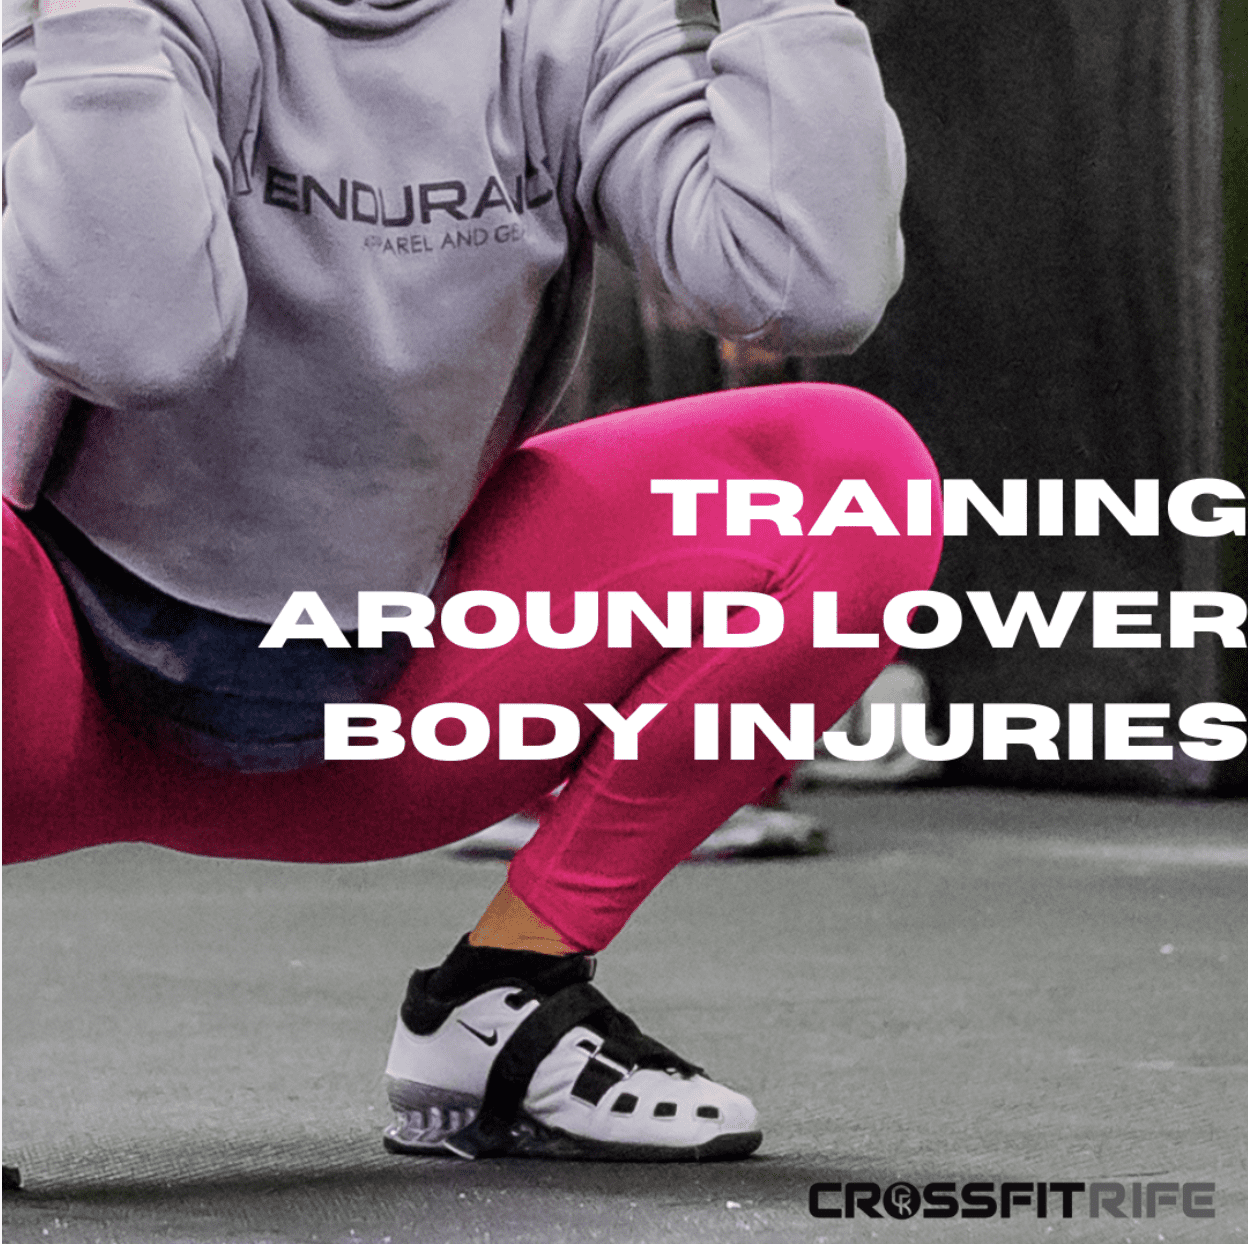 Training With Lower Body Injuries